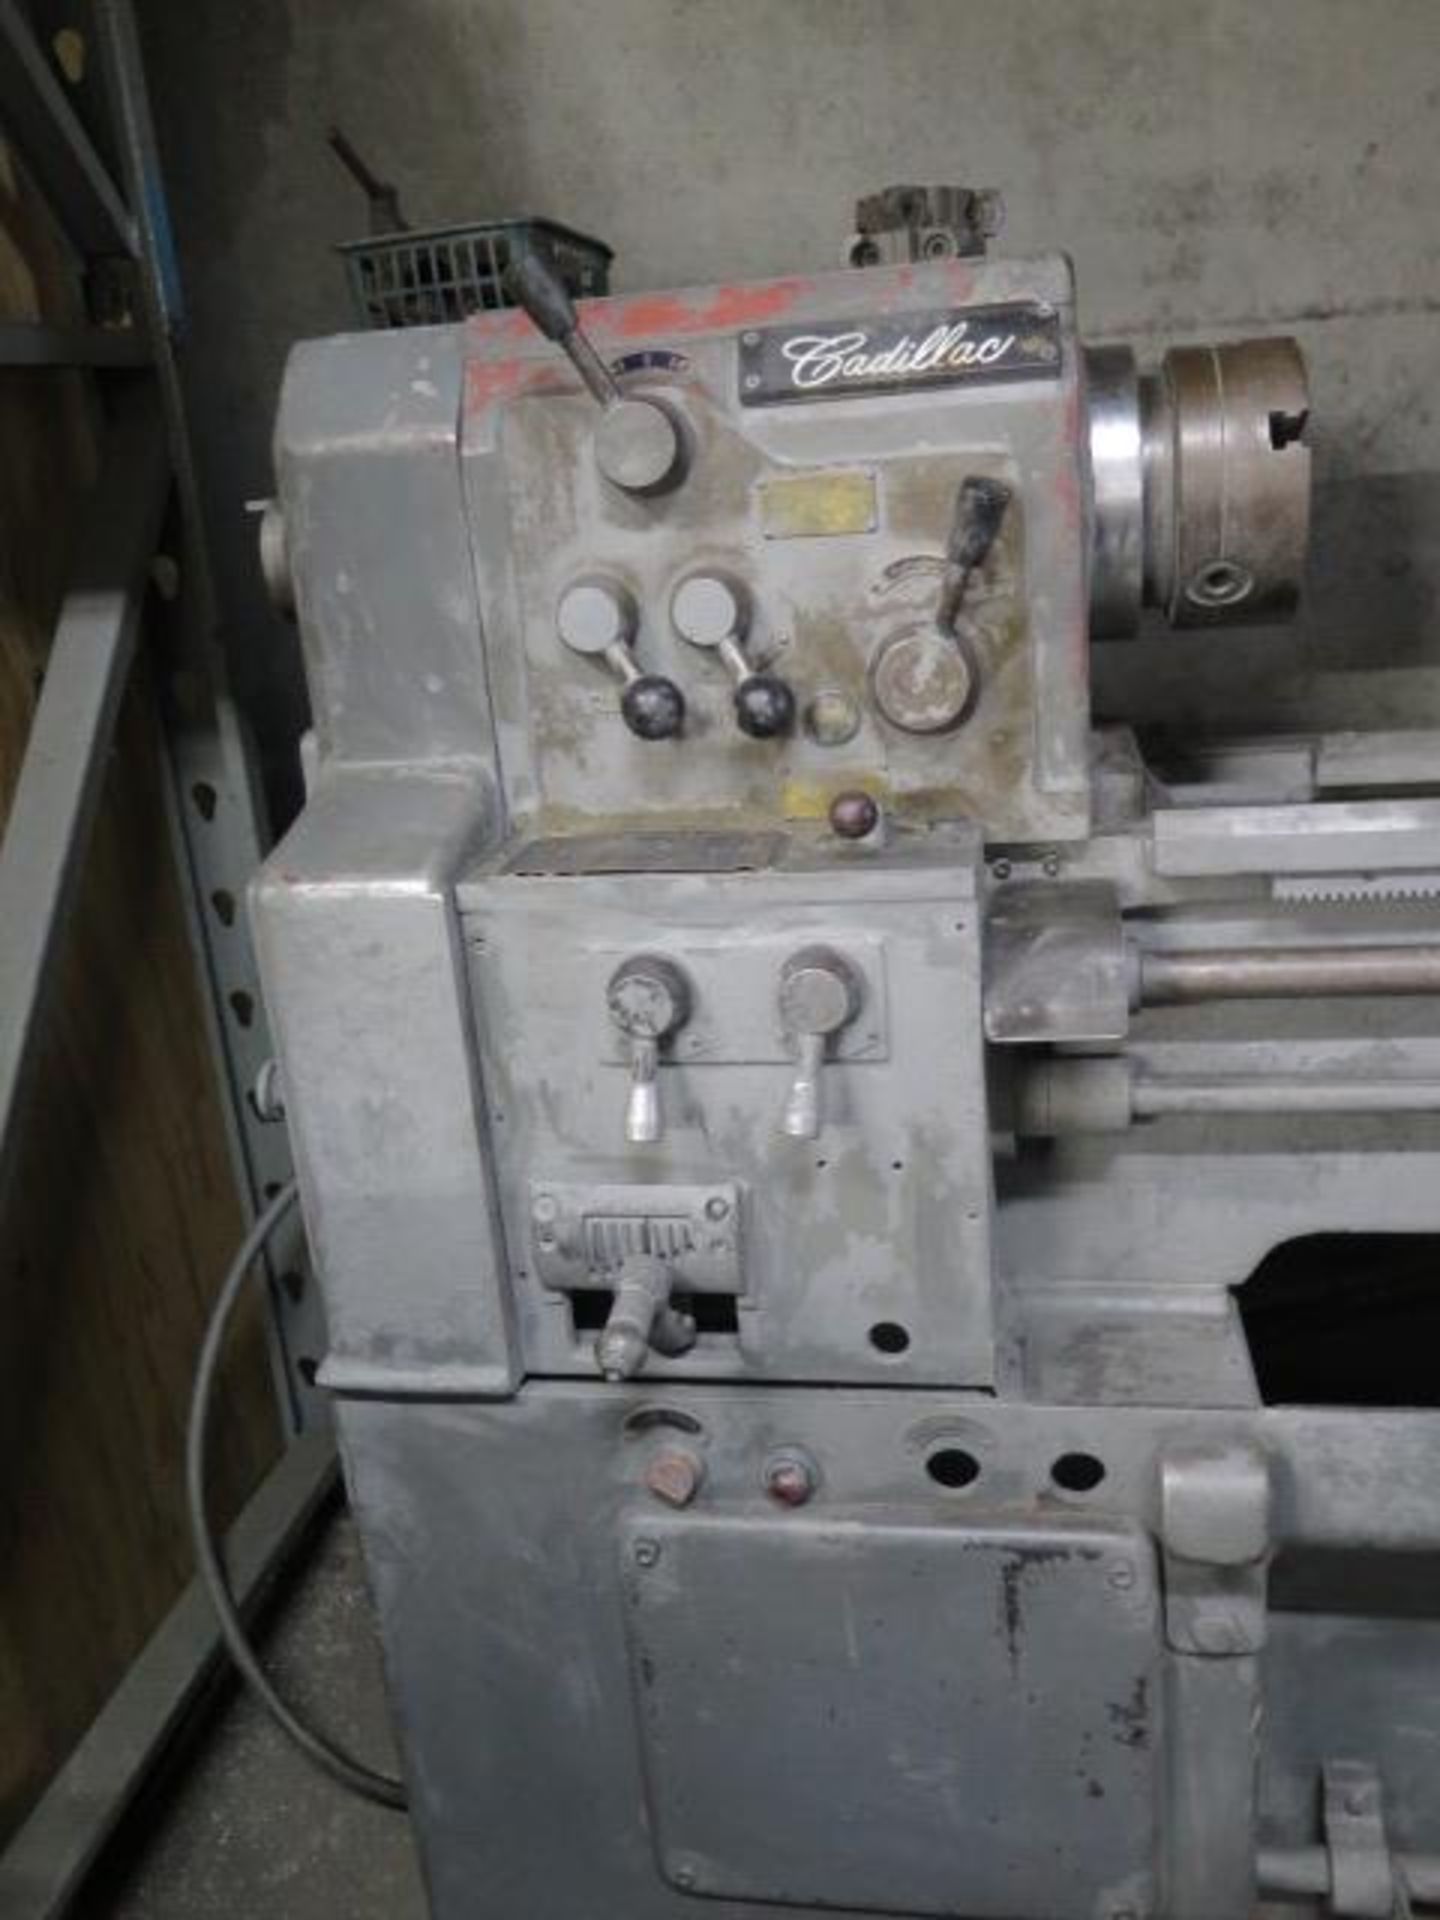 Cadillac 13” x 24” Geared Head Gap Bed Lathe w/ 83-1800 RPM, Inch Threading, Tailstock, SOLD AS IS - Image 4 of 9